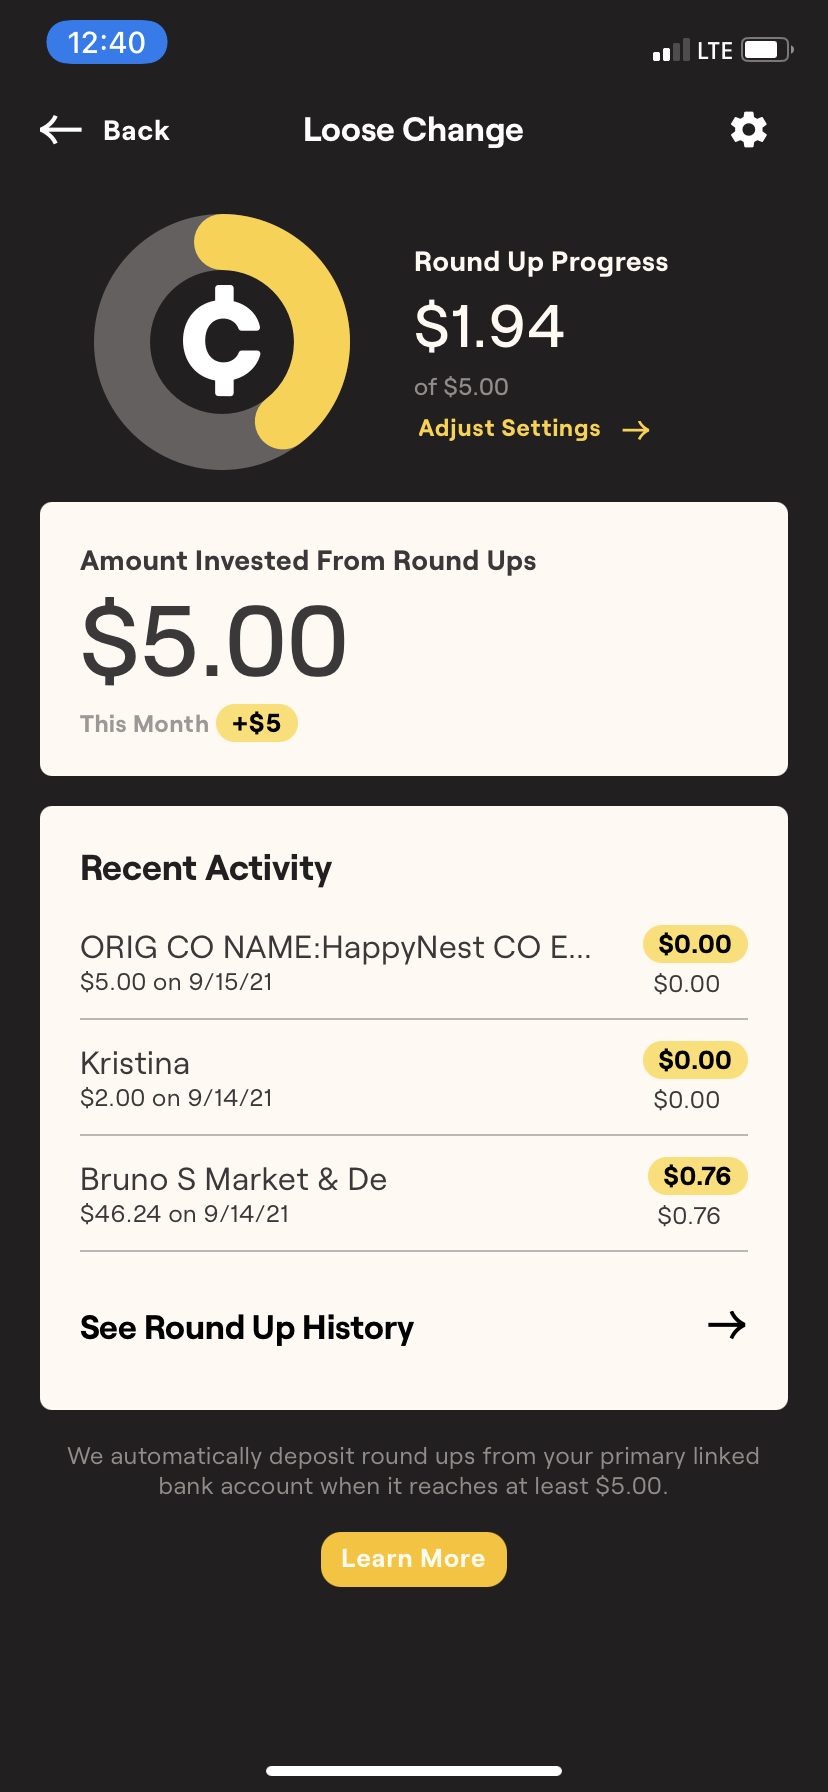 Loose Change Round up activity log in HappyNest app